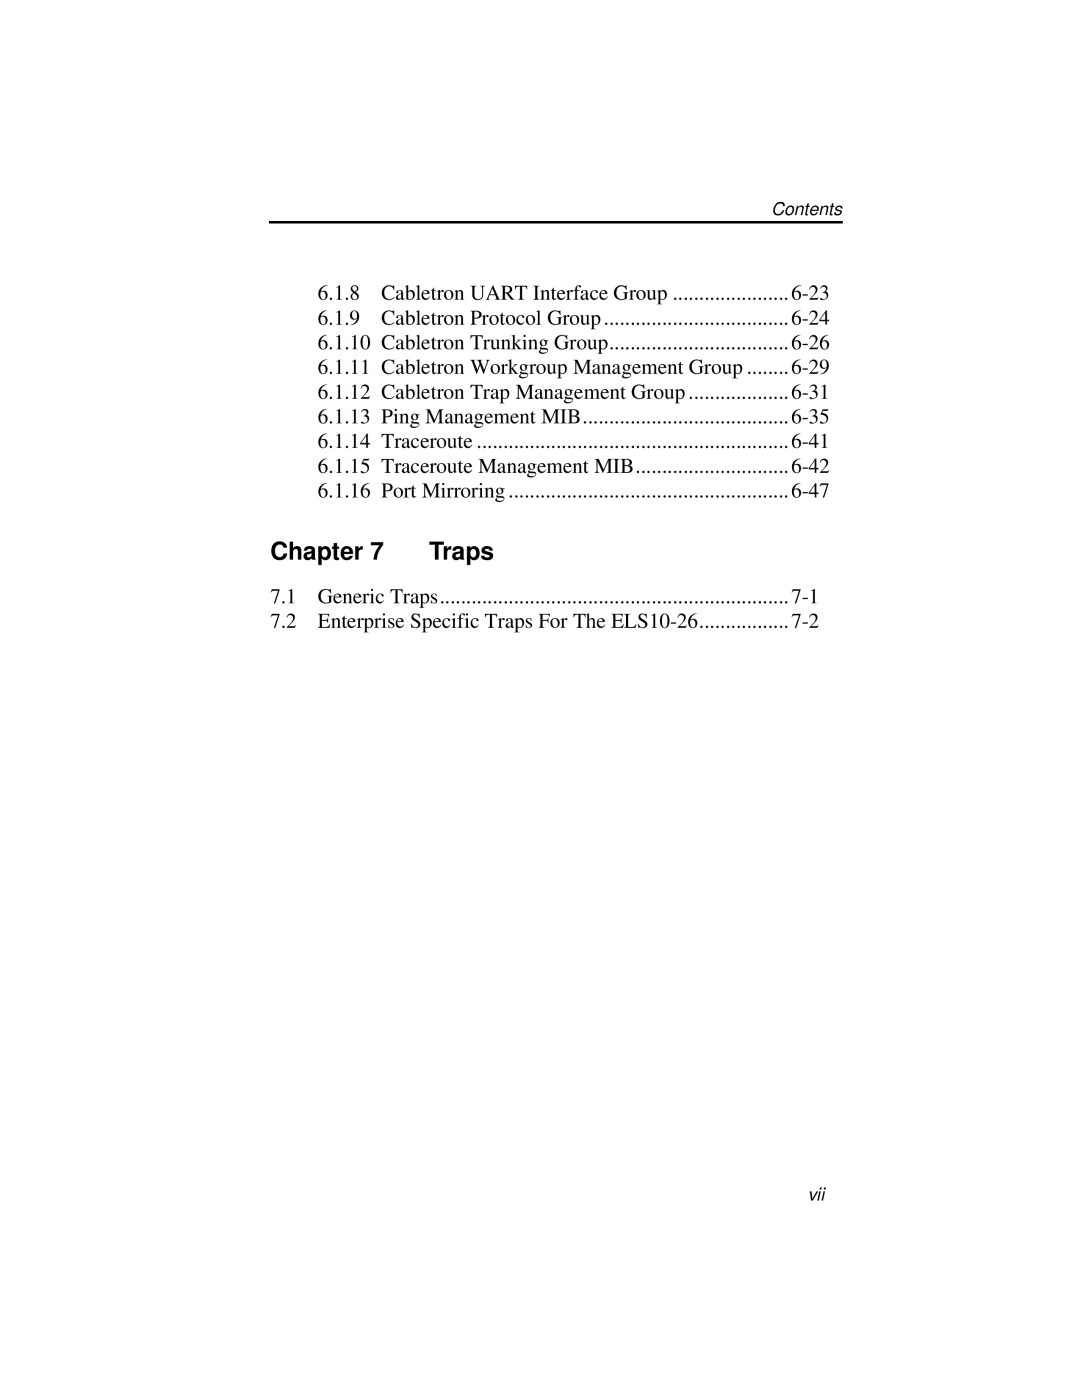 Cabletron Systems ELS10-26 manual Traps, Chapter, 6.1.8 